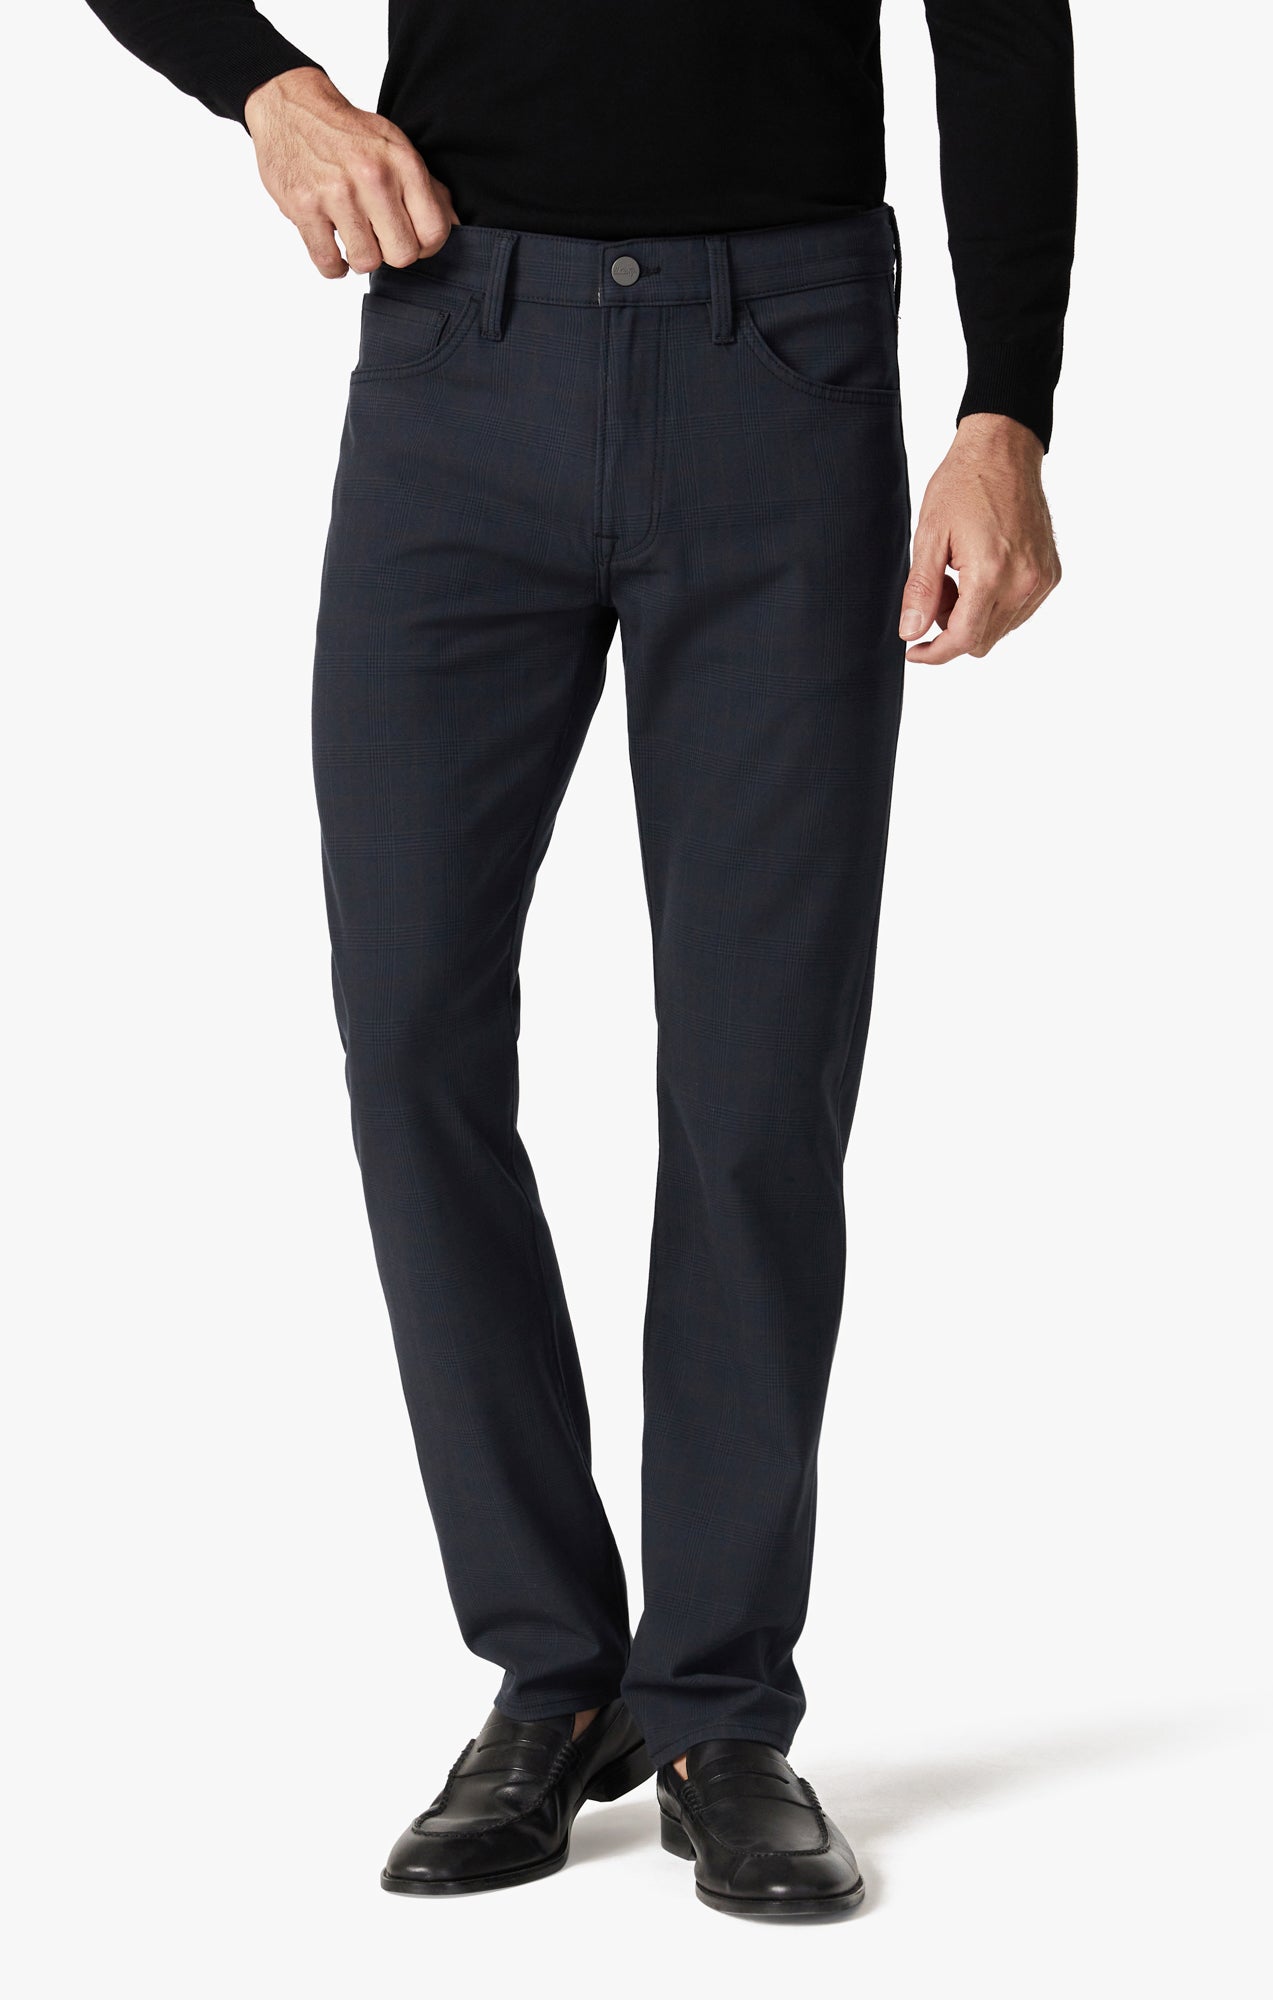 Courage Straight Leg Pants in Navy Elite Check Image 3